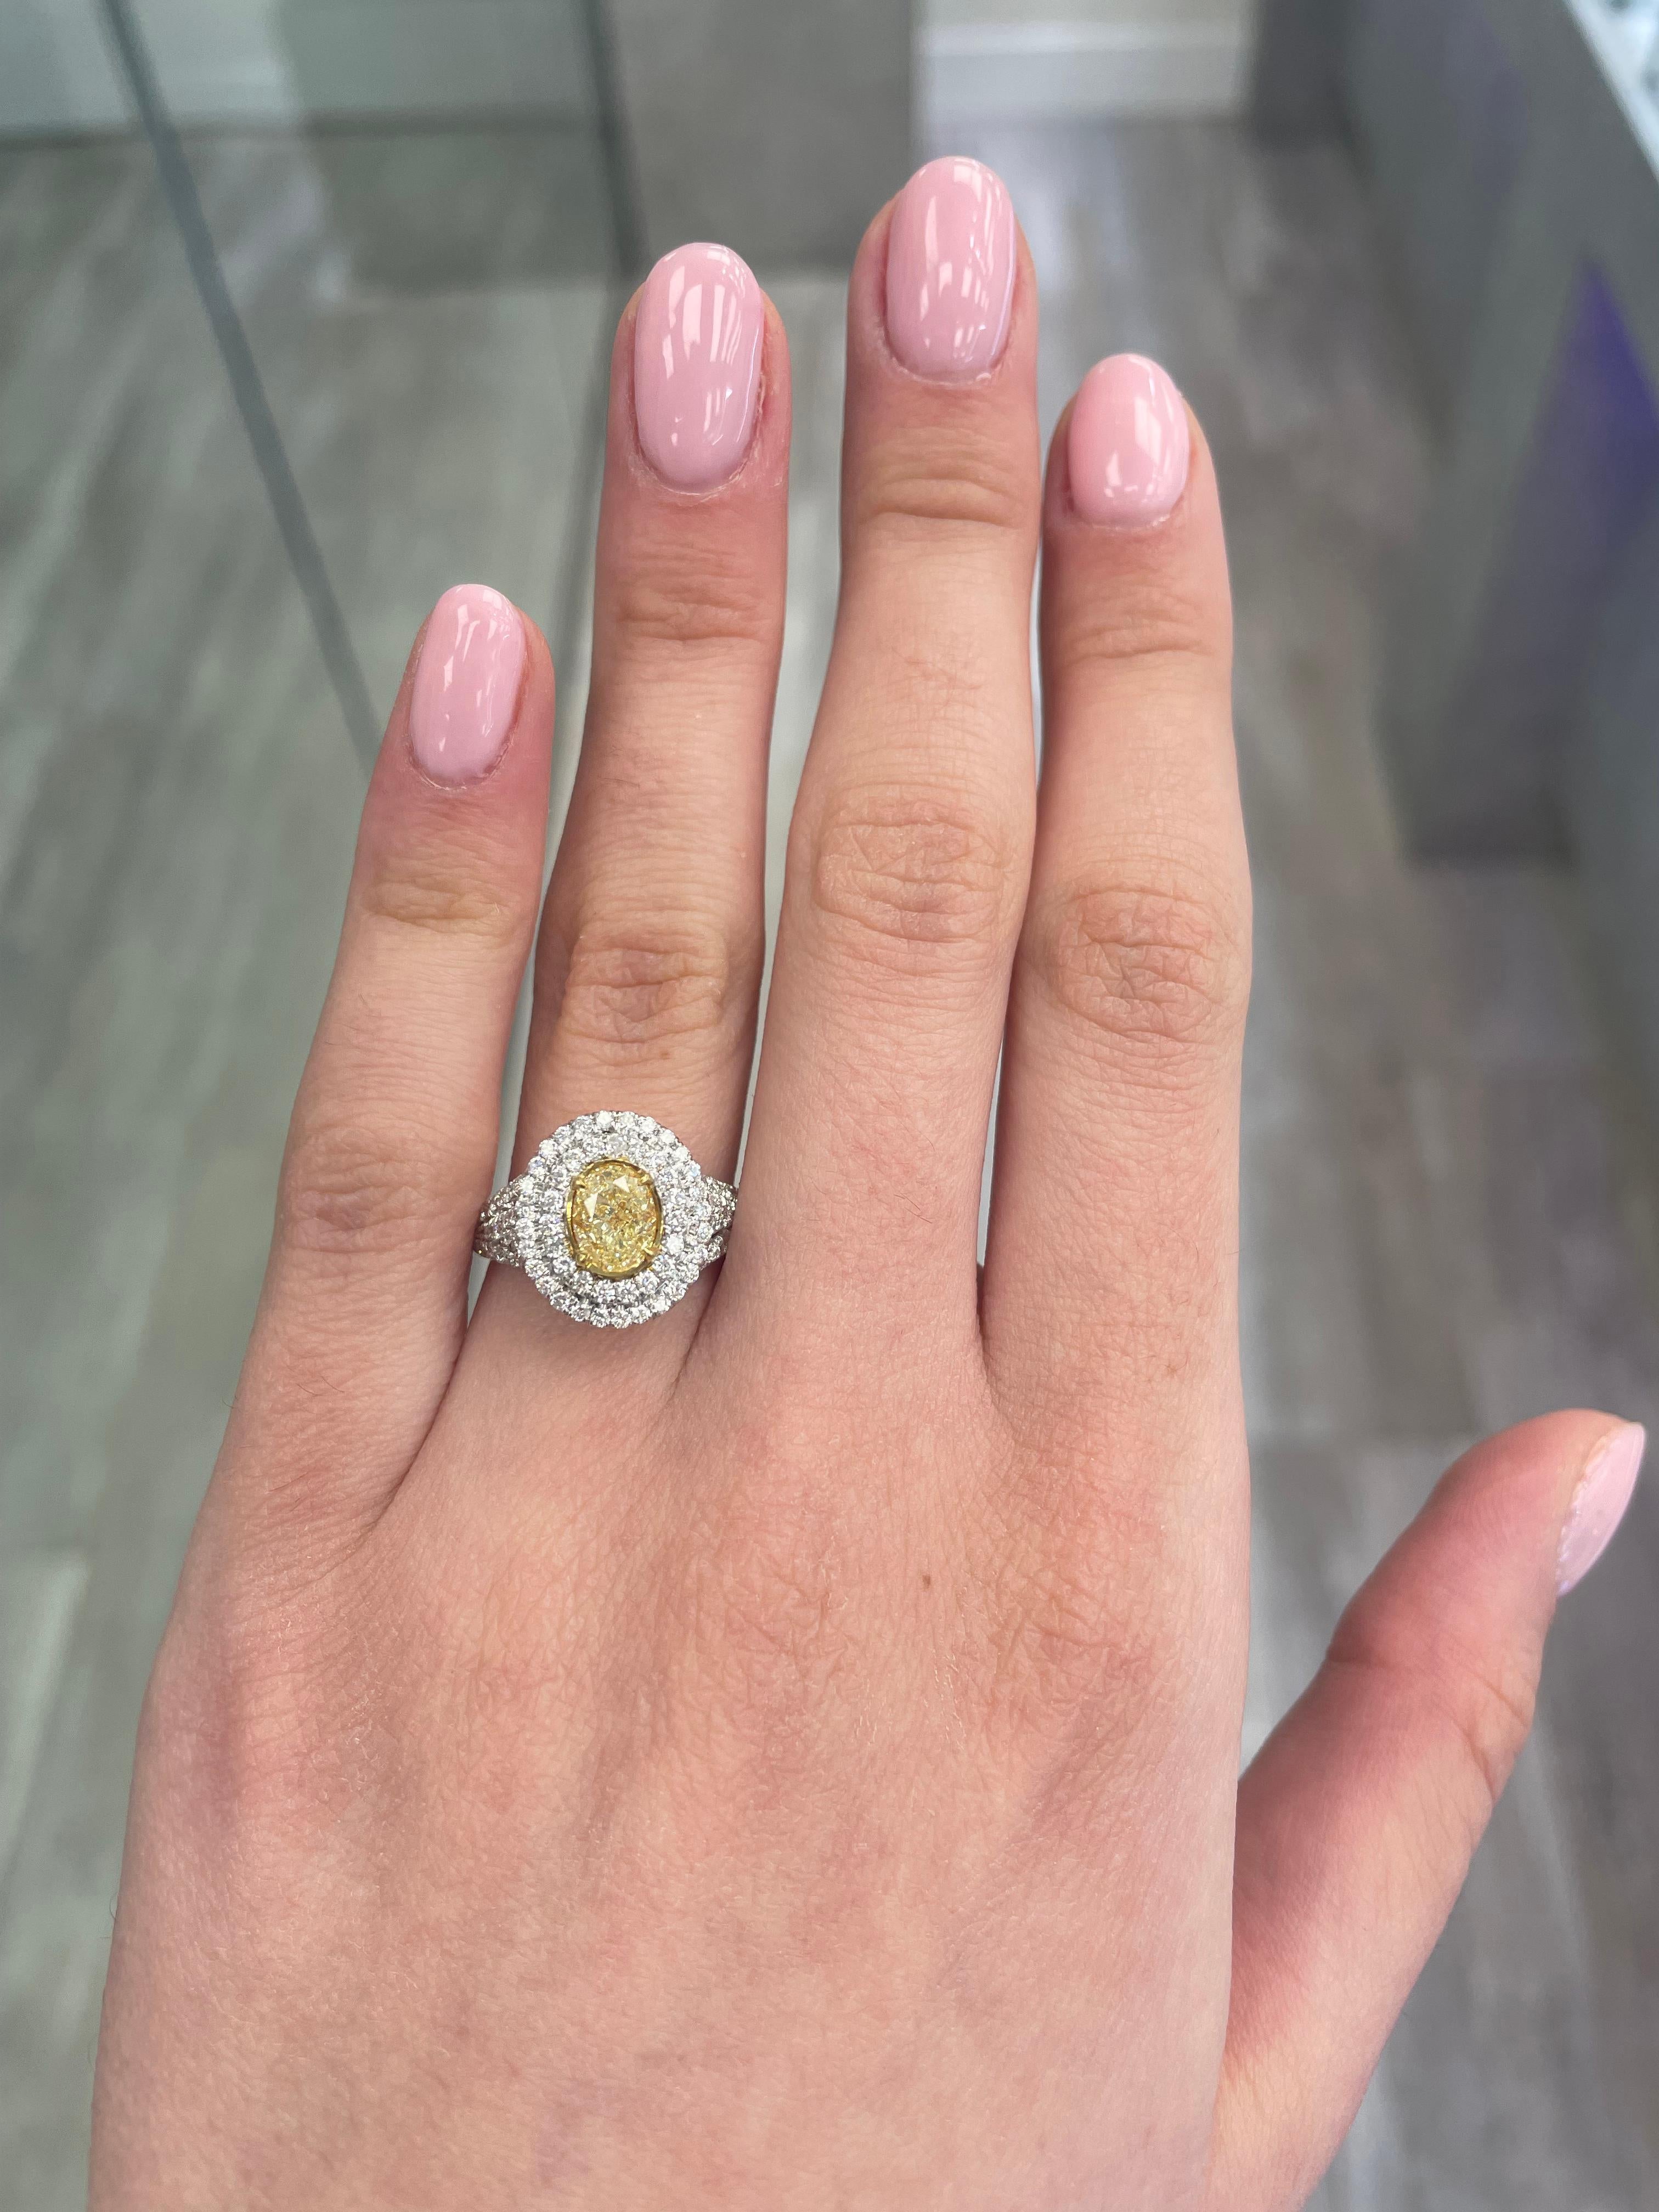 Stunning modern EGL certified yellow diamond double halo ring, two-tone 18k yellow and white gold. By Alexander Beverly Hills
2.10 carats total diamond weight.
1.05 carat oval cut Fancy Intense Yellow color and VS2 clarity diamond, EGL graded in the